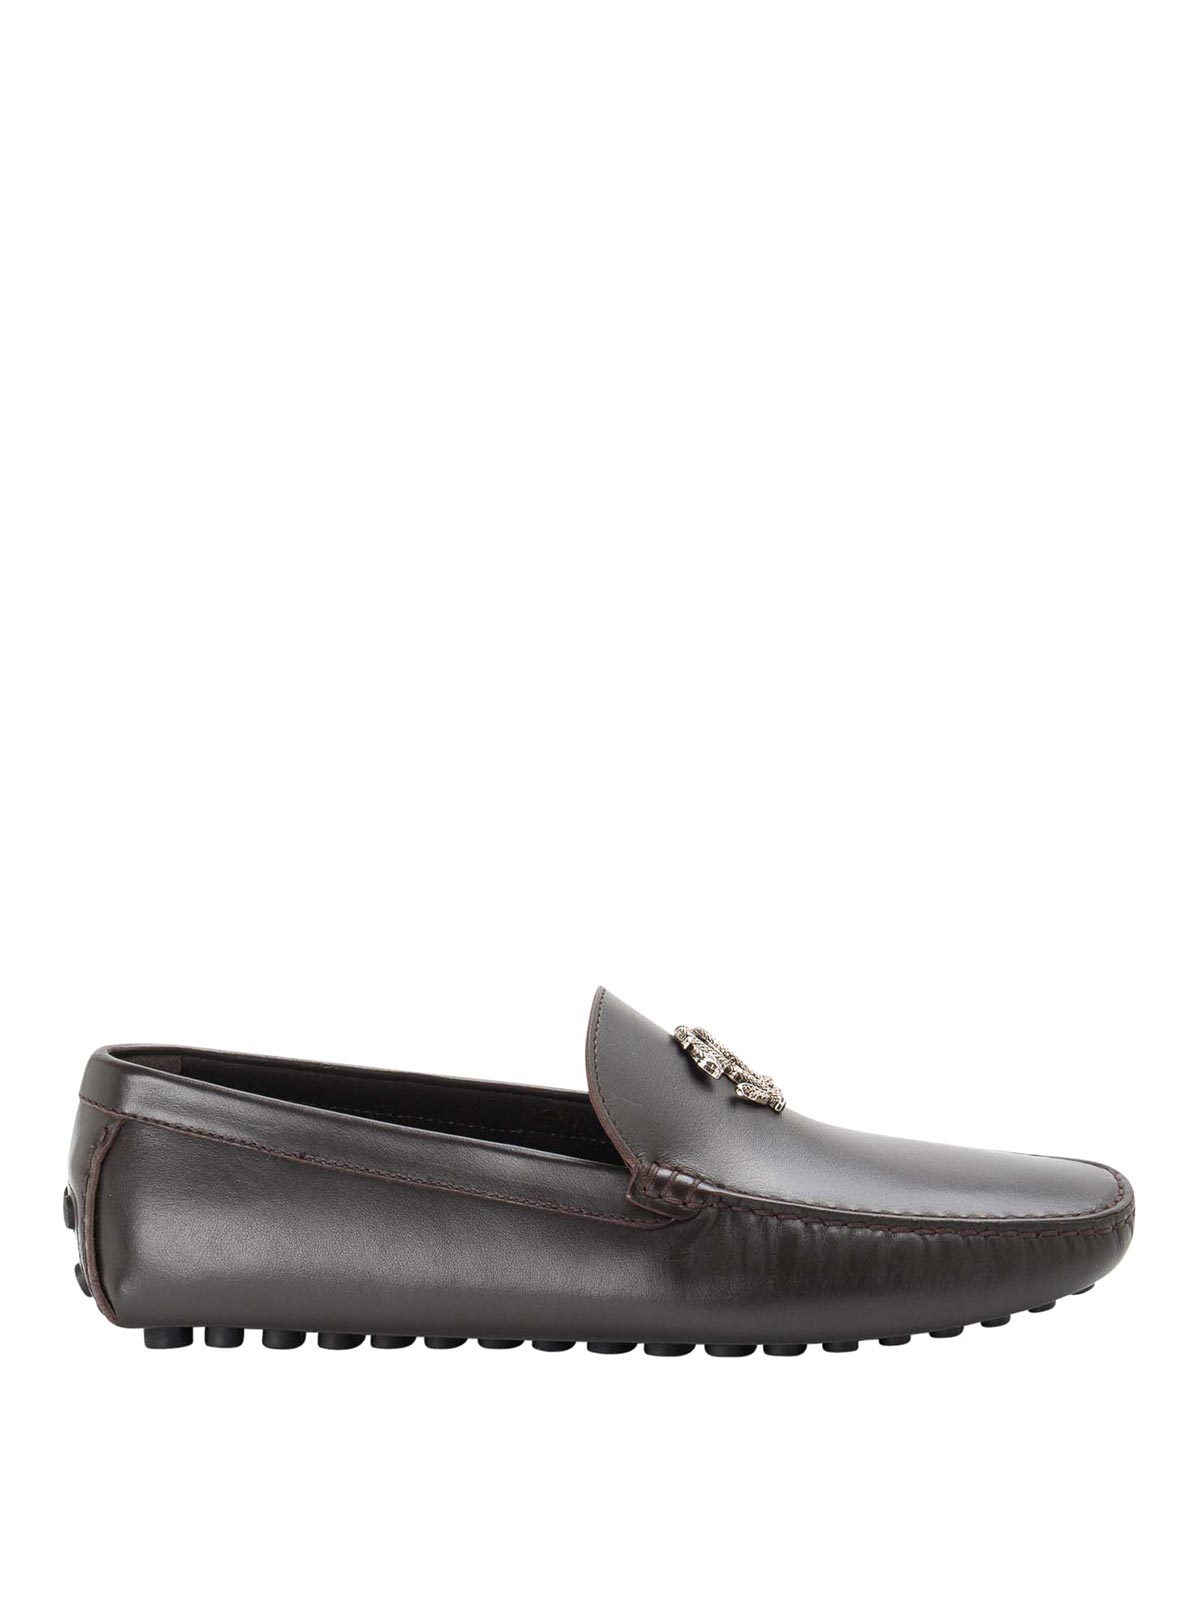 Roberto Cavalli Leather Loafer In Marrón